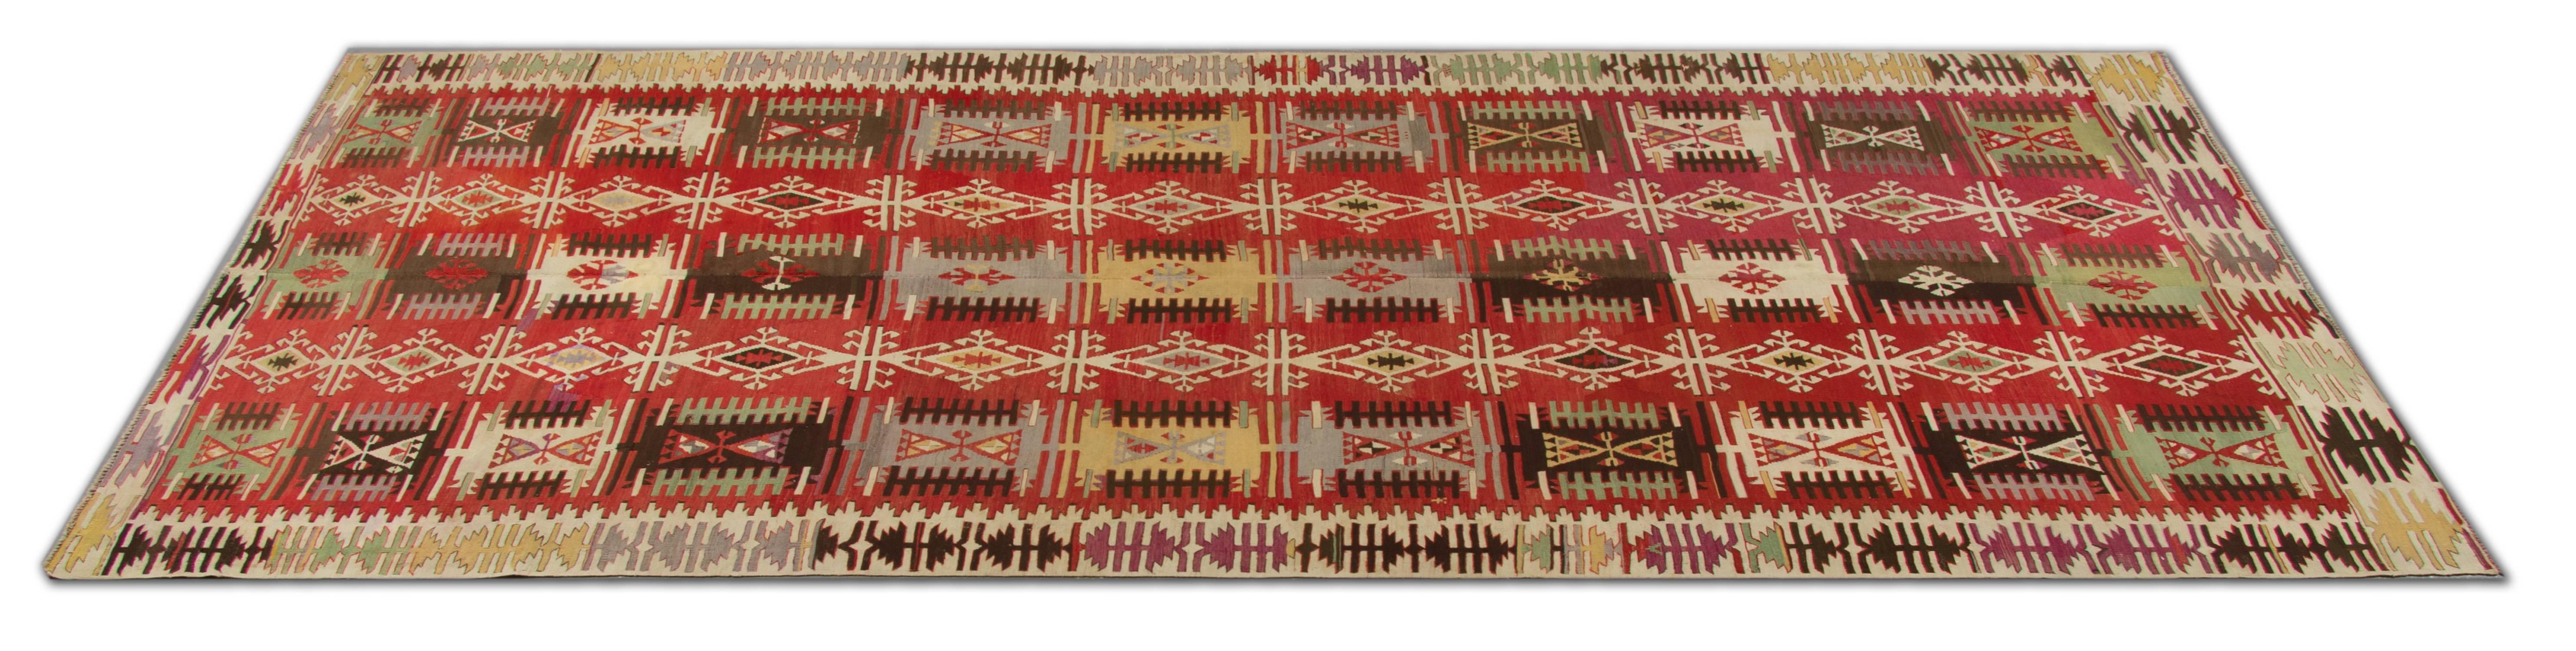 These are handmade carpet antique rugs from Konya, which is located in the heart of Turkey. These large rugs are in excellent condition. The workshop Kilims of Konya are mostly known for their distinctive geometric rug designs. This tribal rug has